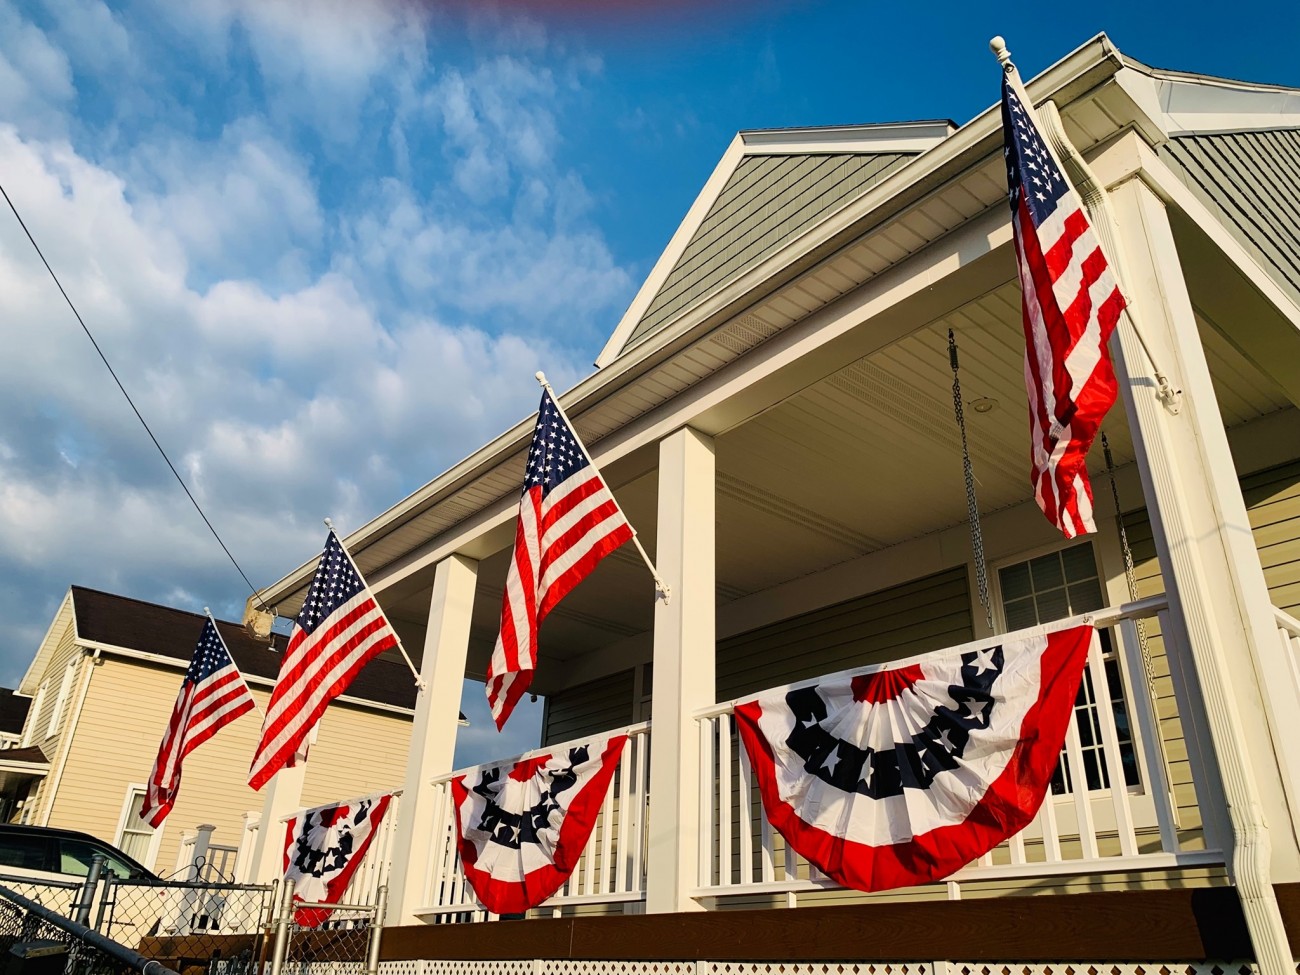 Porch decorated with patriotic pleated fans and American flags